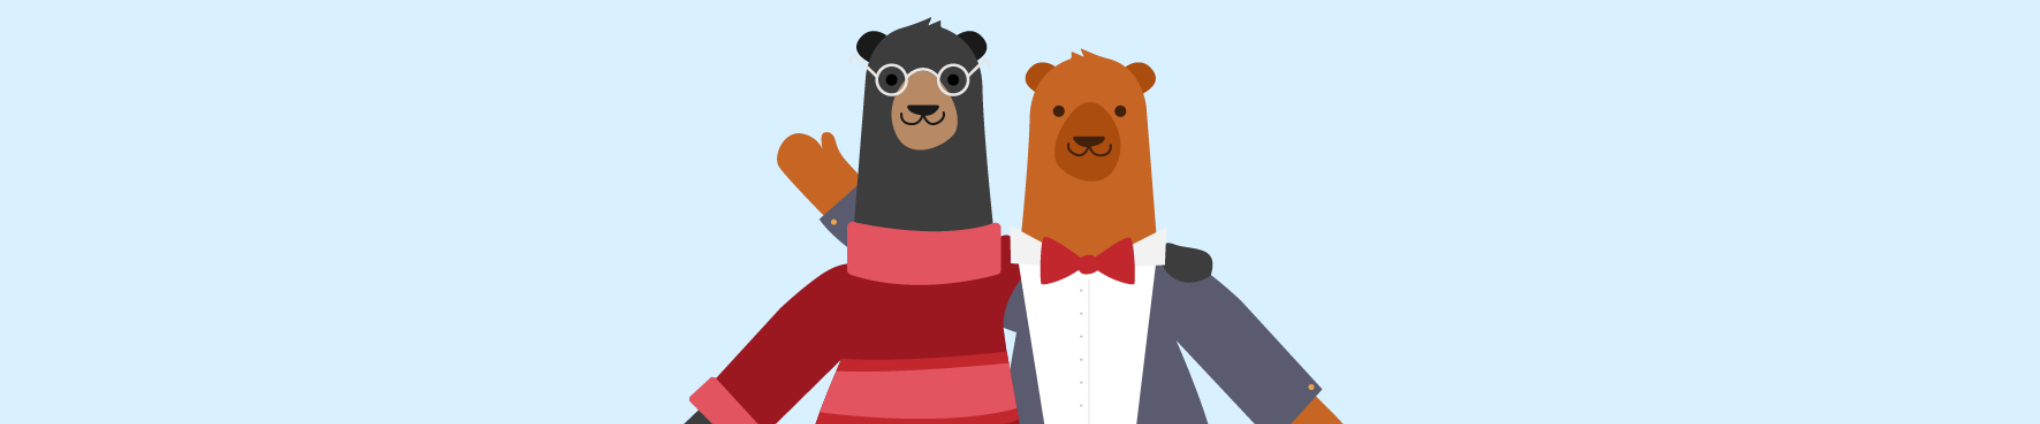 image of two illustrated bears wearing sweaters with their arms around each other